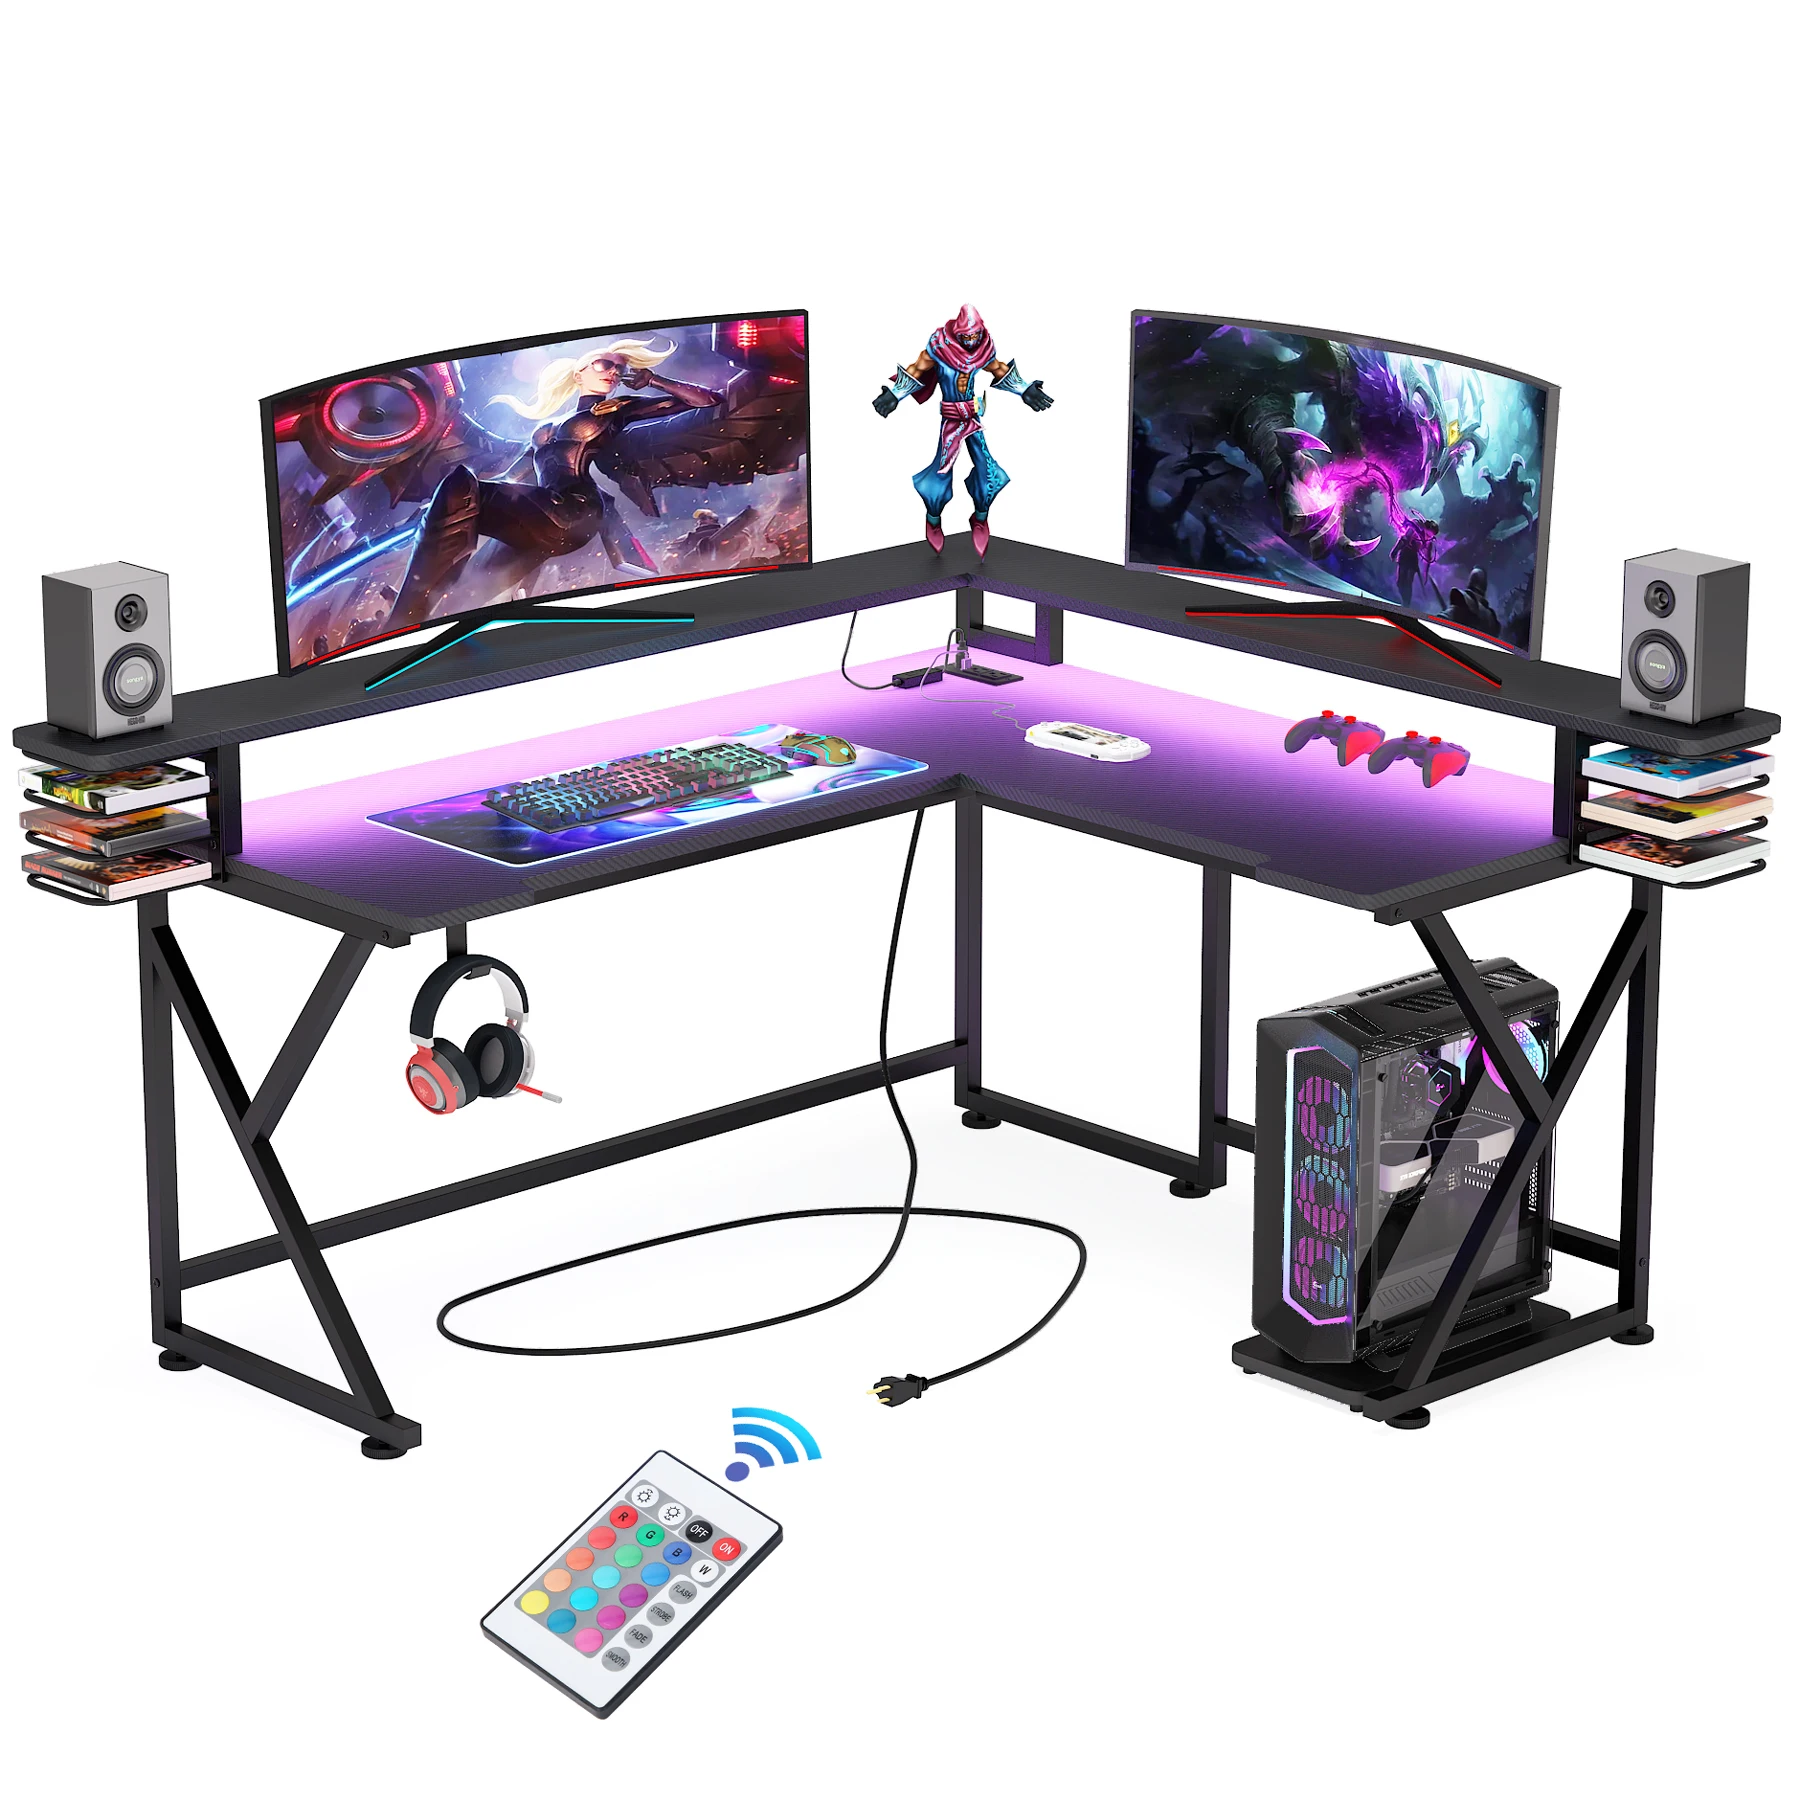 All-in-one PC Gaming Desk Cool Shape LED RGB Light Computer Desk Racing Style Office Table For Gamer